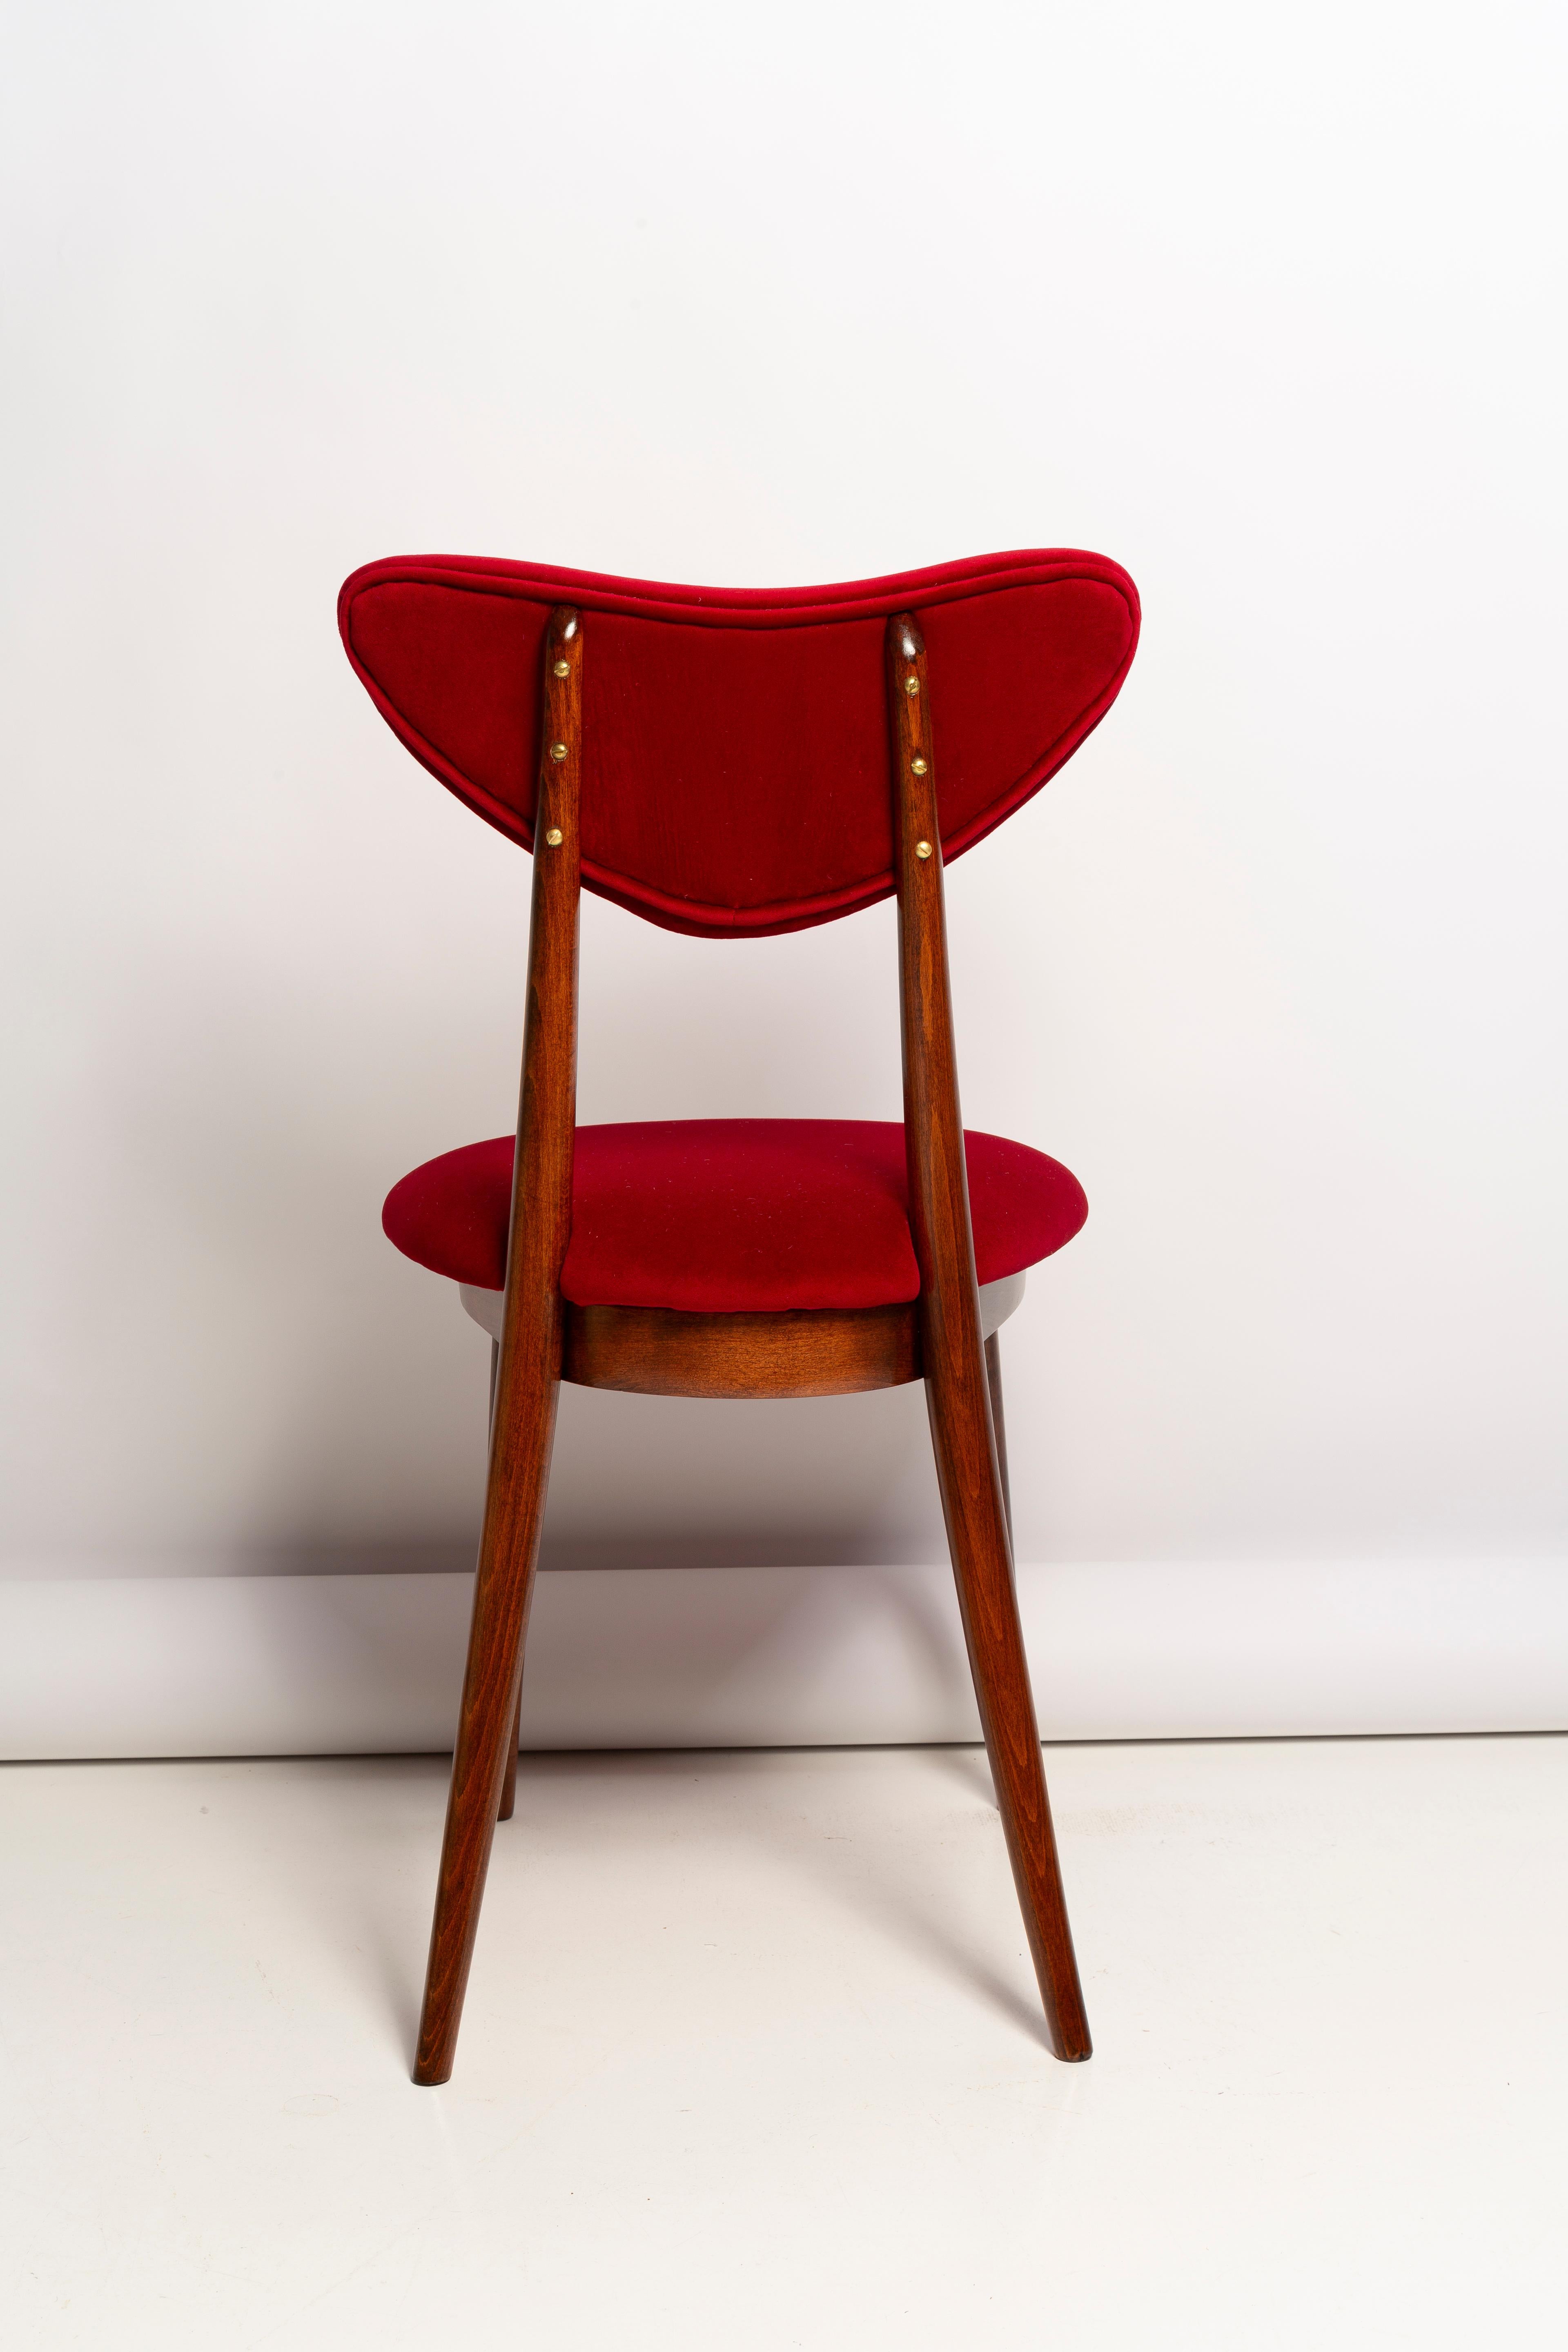 Set of Twelve Mid Century Red Heart Chairs, Poland, 1960s For Sale 5